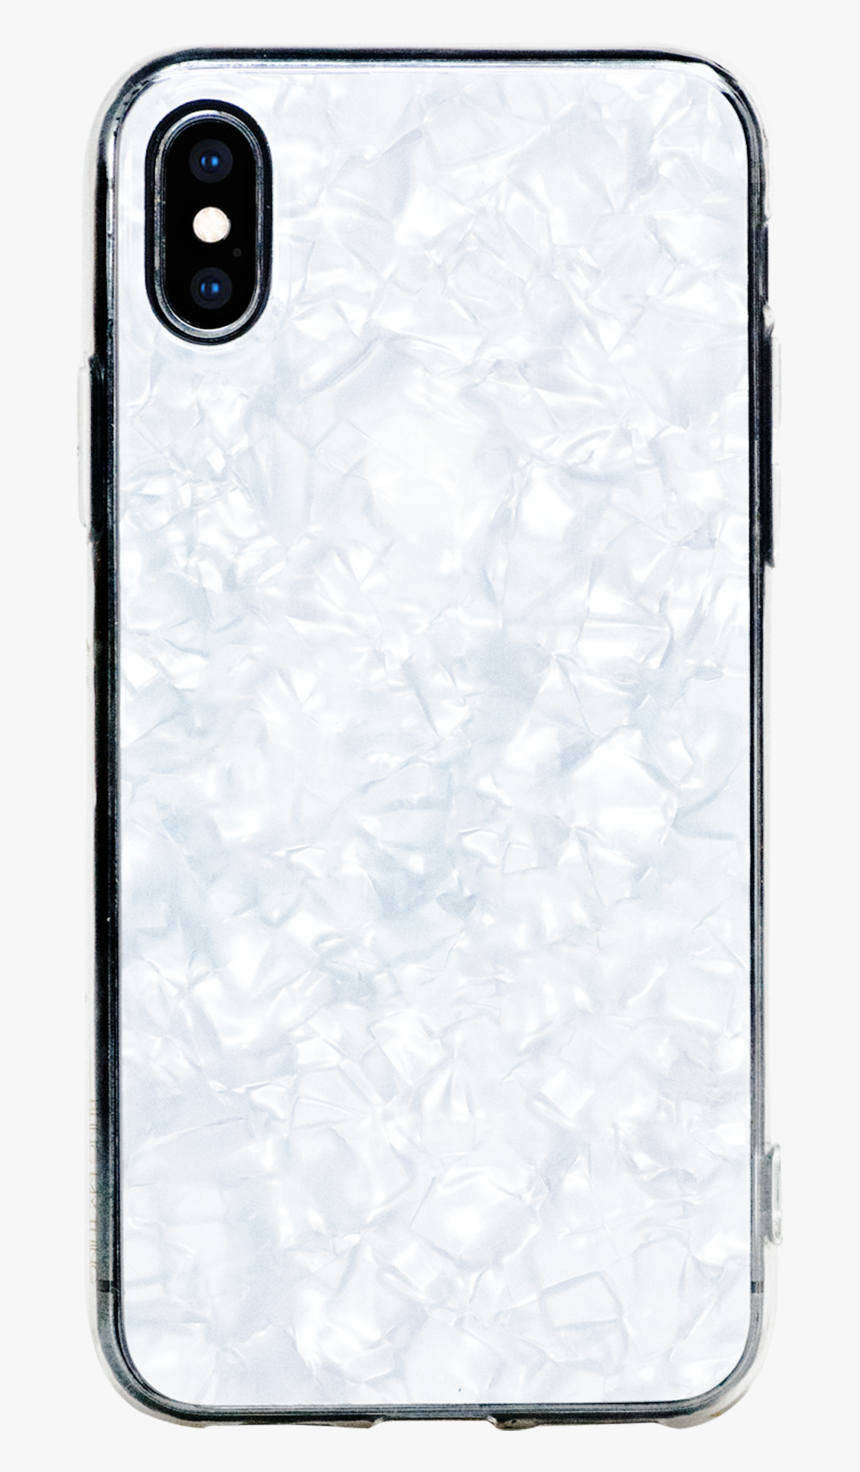 Chic ᛫ Pearl White ᛫ With Shimmering Effect ᛫ Double-layered - Mobile Phone Case, HD Png Download, Free Download